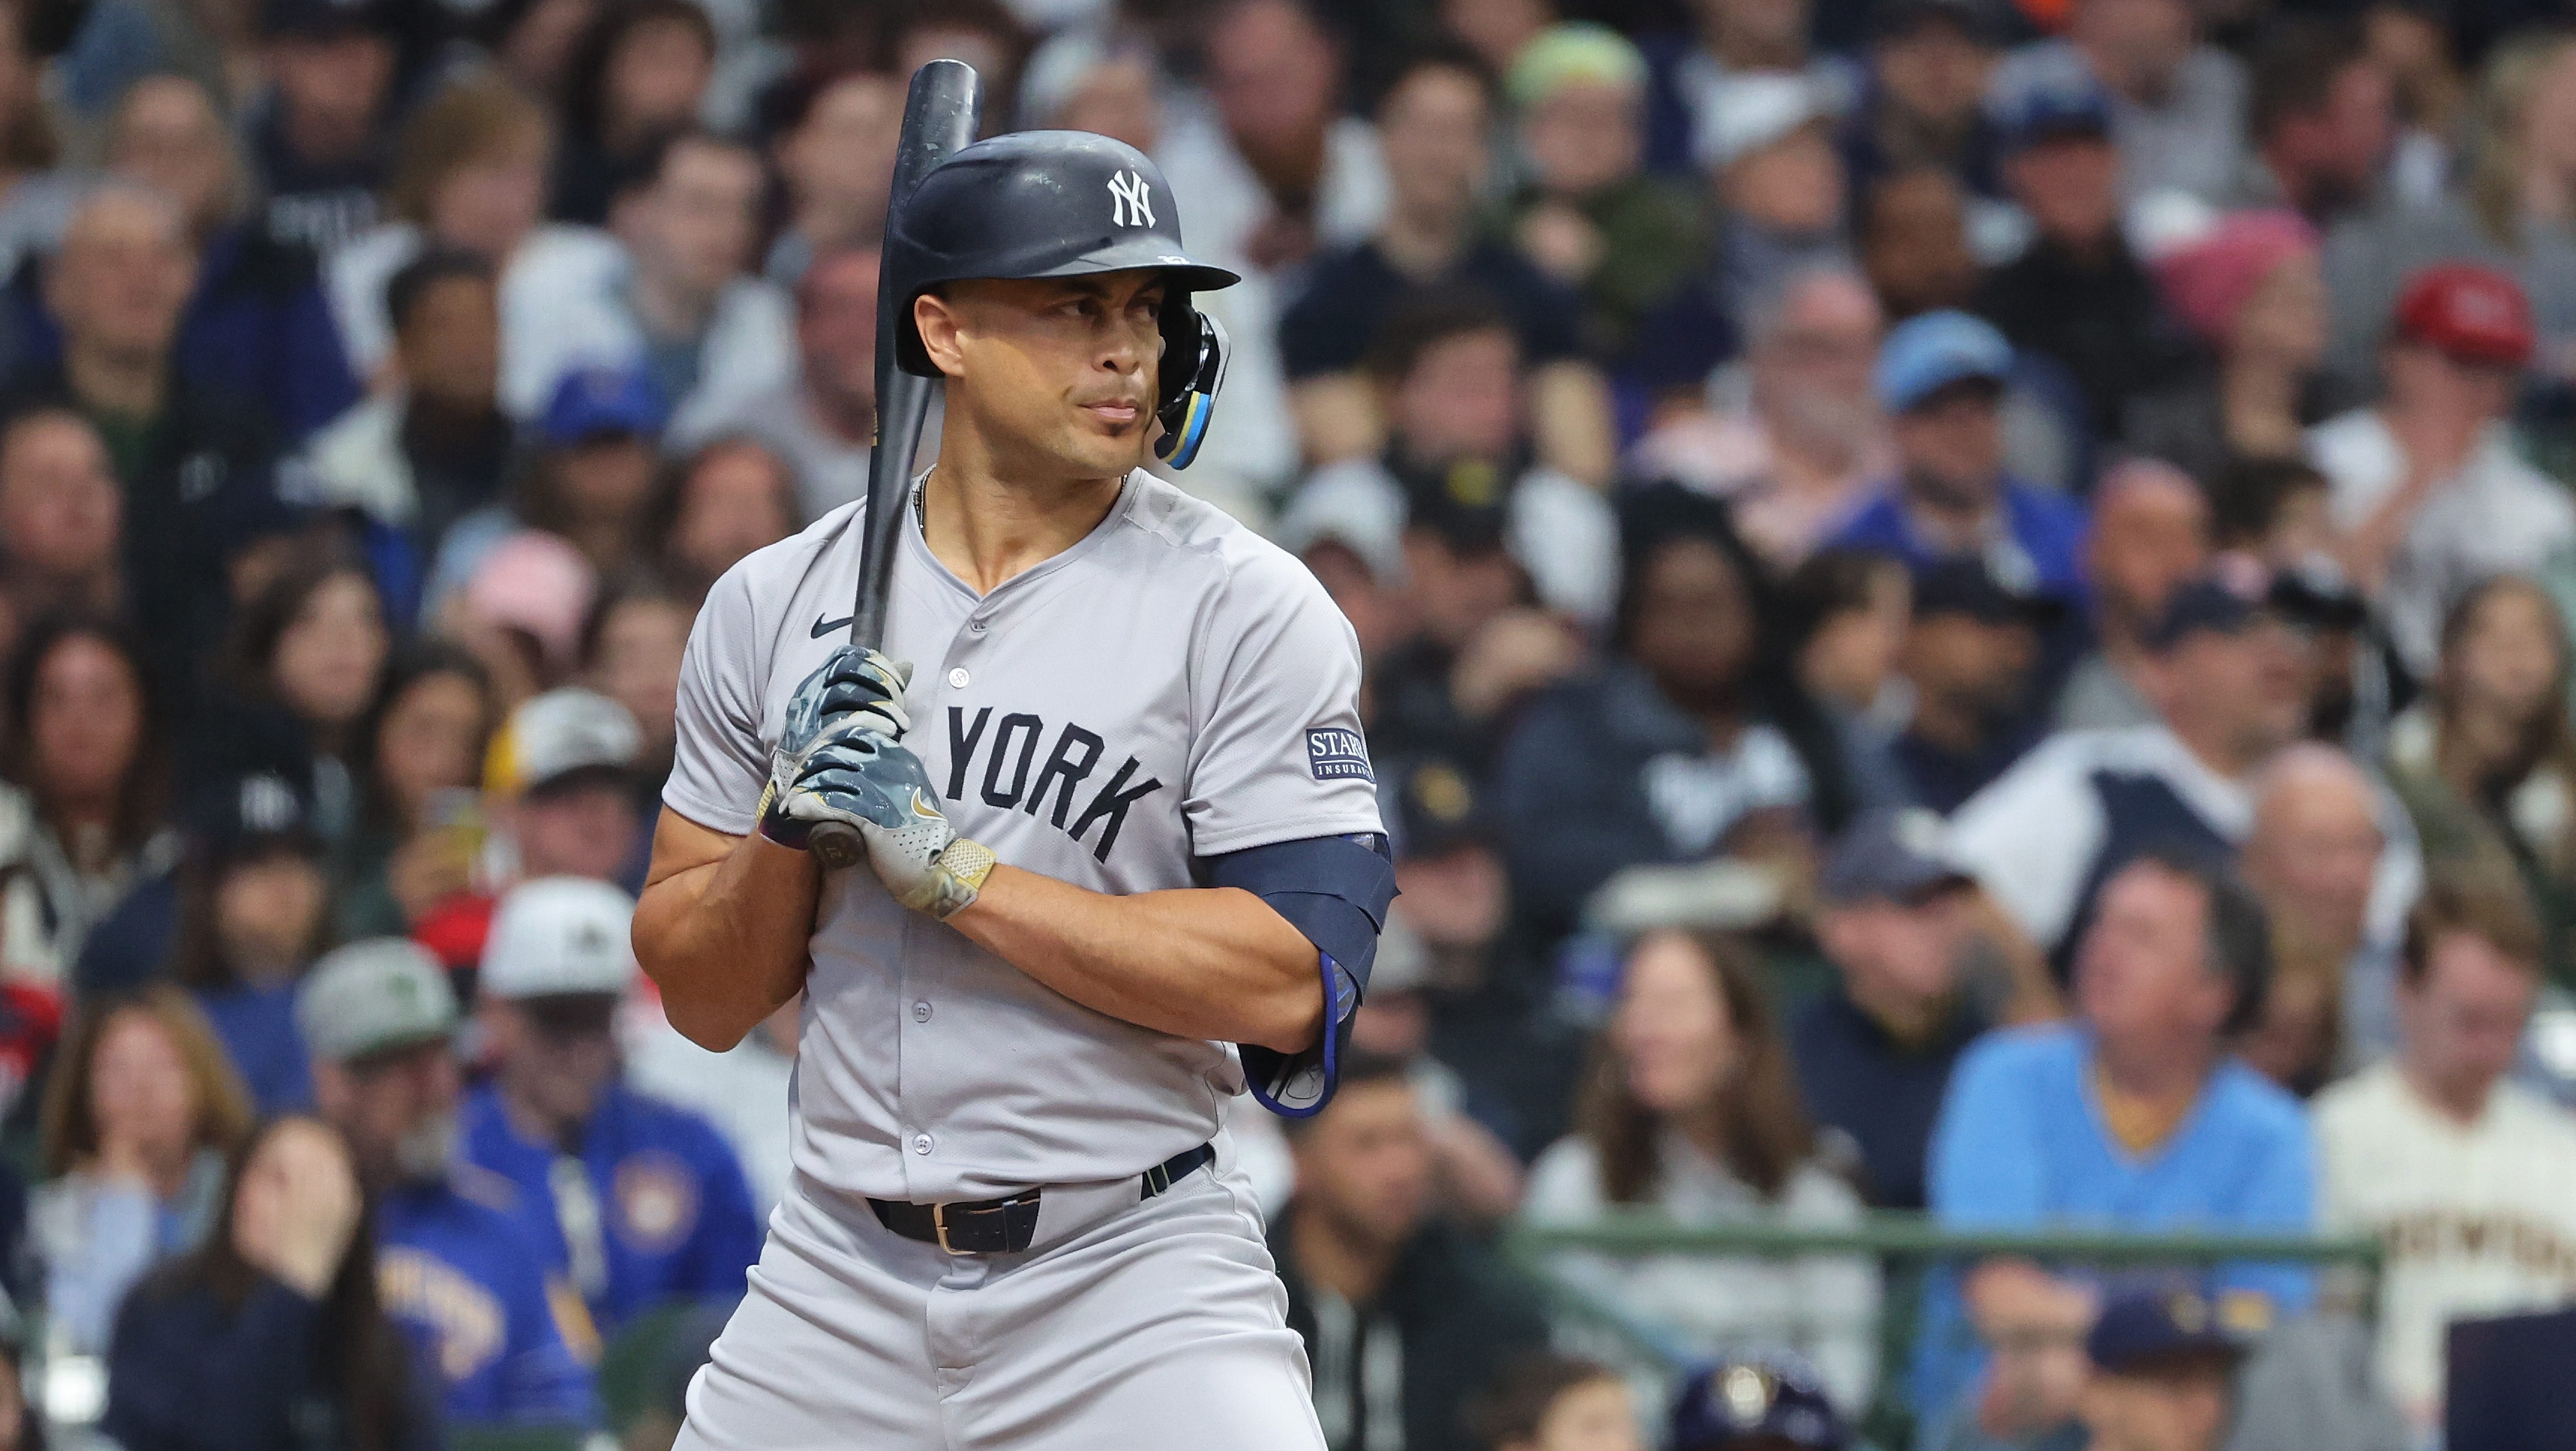 WFAN Host Blasts Yankees’ Giancarlo Stanton: ‘He’s Just Not a
Baseball Player’